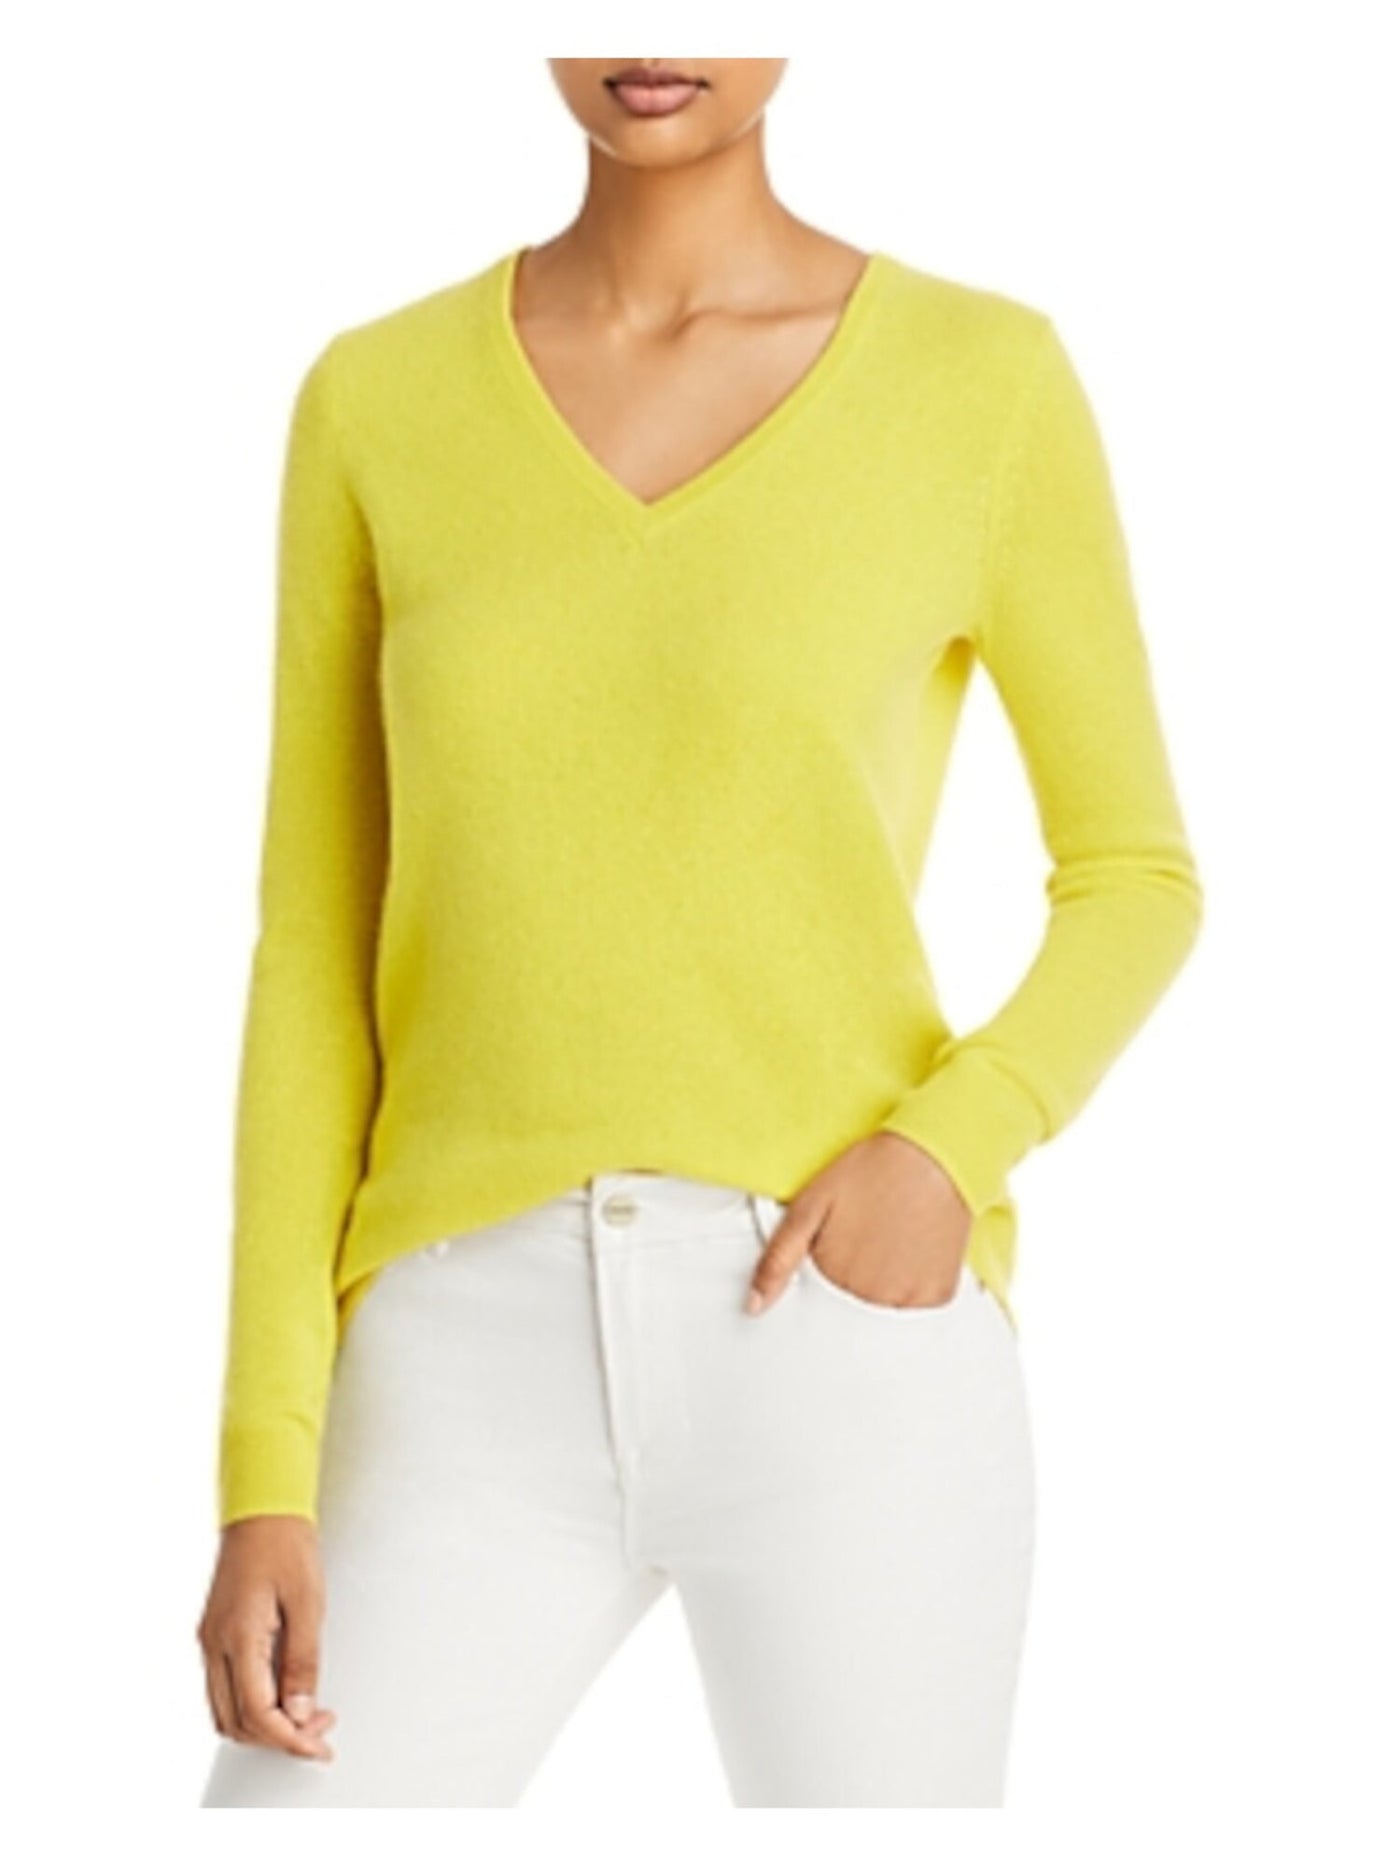 C Womens Yellow Cashmere Long Sleeve V Neck Wear To Work Sweater S